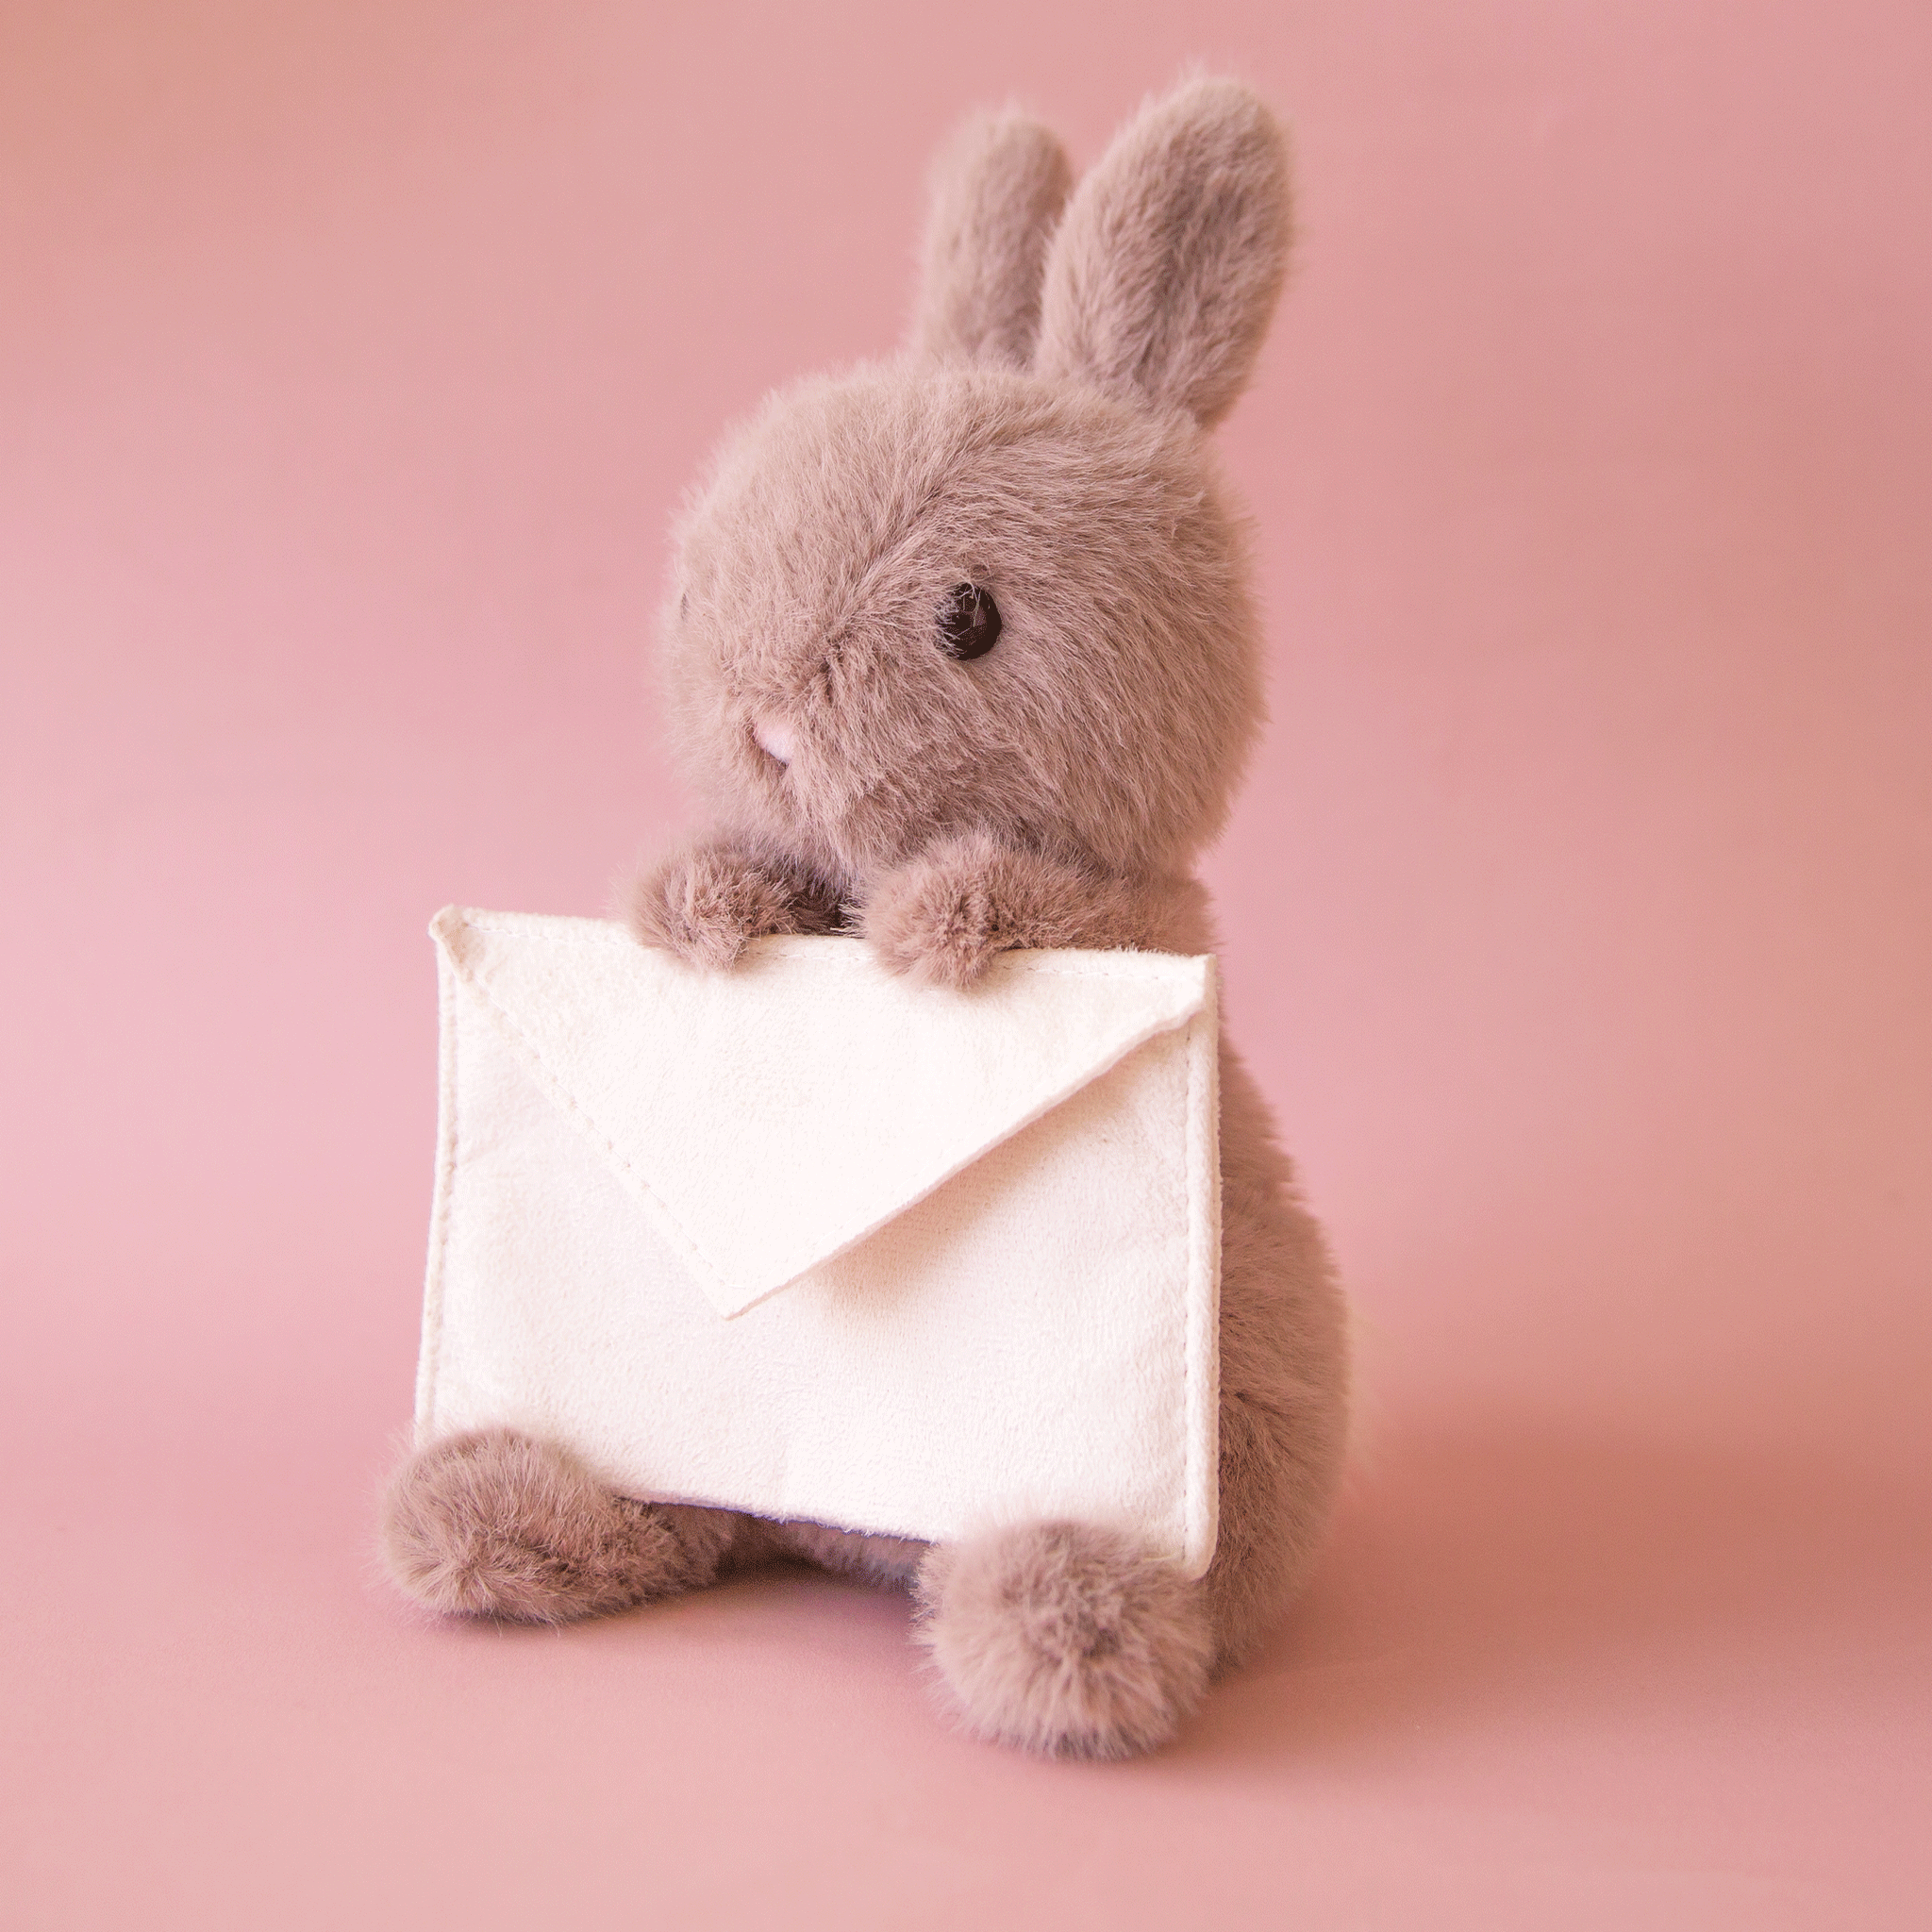 On a pink background is a grey bunny stuffed animal holding an ivory felt envelope. 